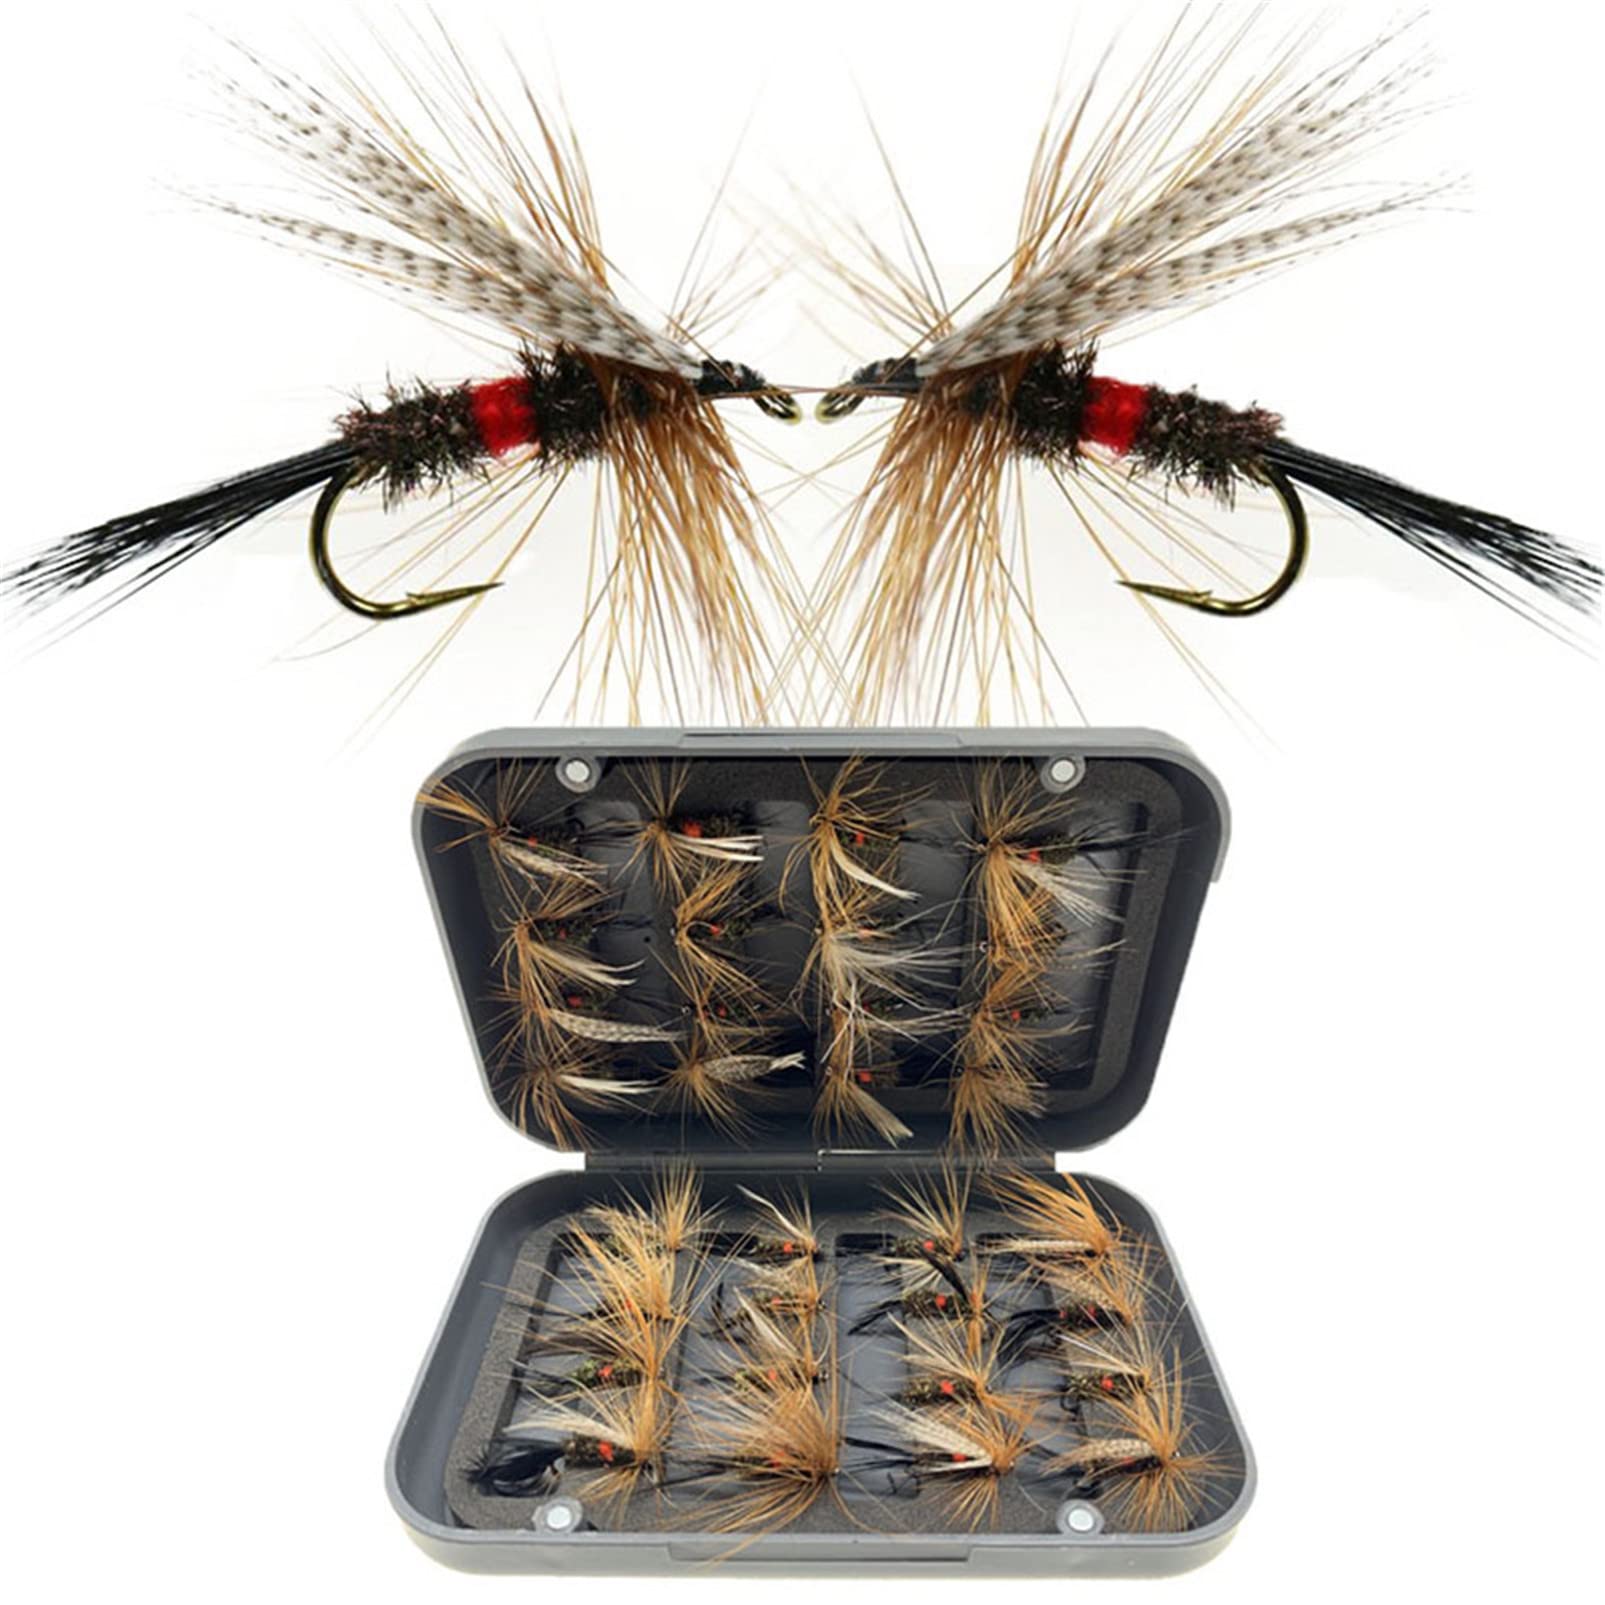 DOACT Fly Lure,Fishing Accessory,12 Pcs Fly Fishing Lure Simulation Moth  Butterflies Water Flying Bait Fishing Tool